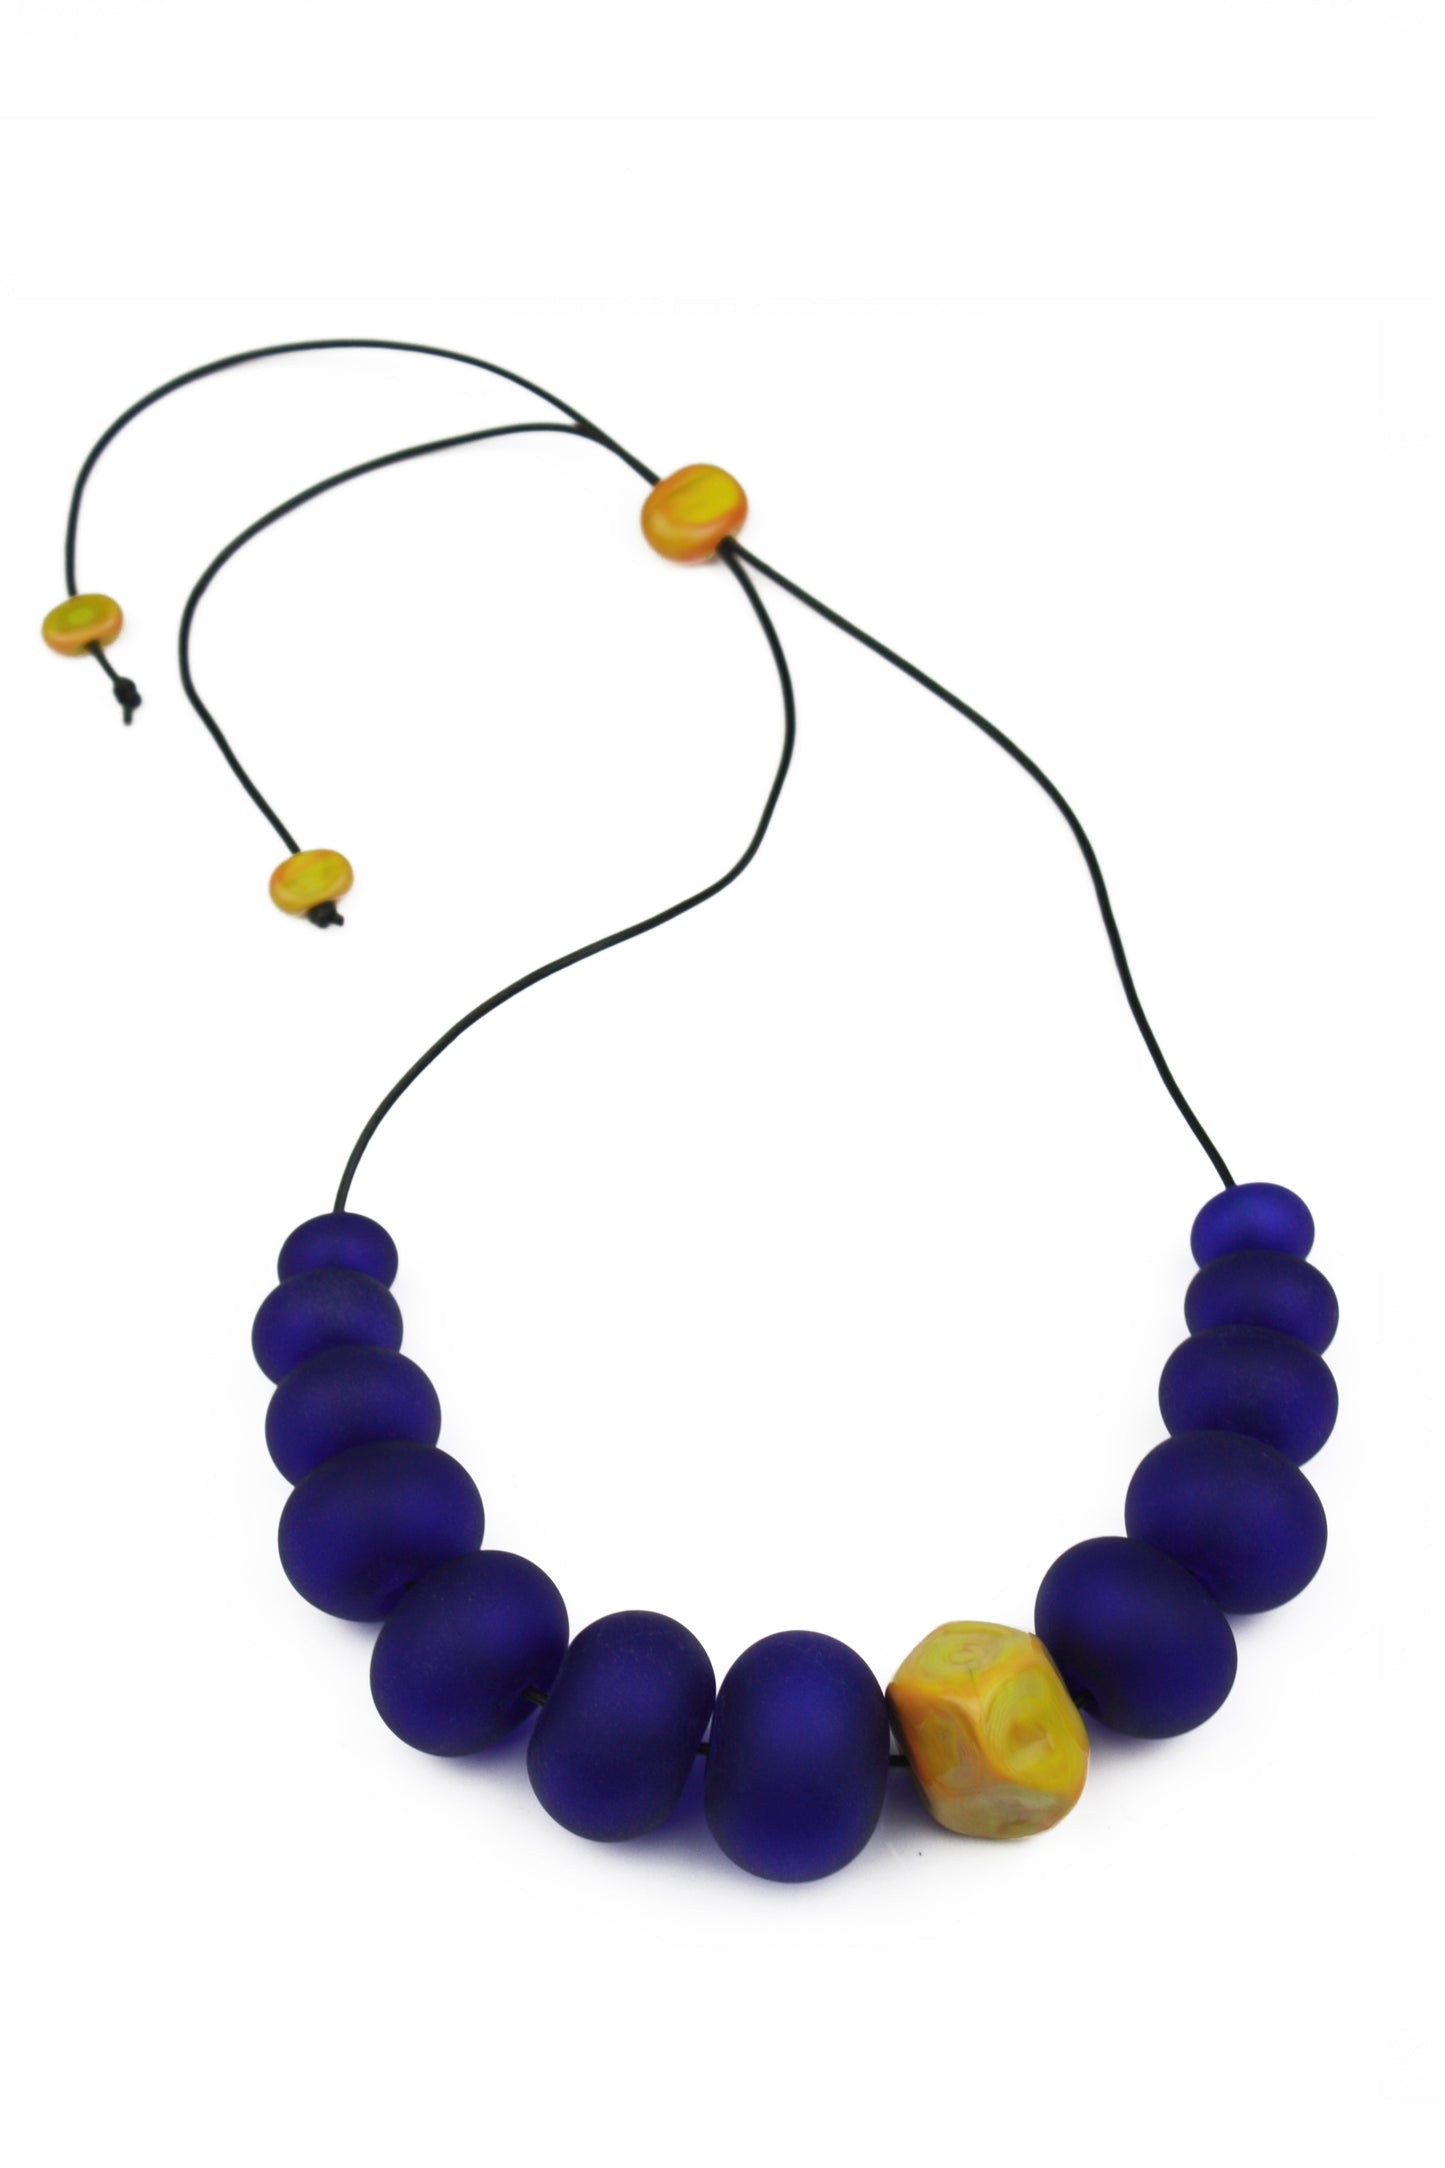 Necklace of hand blown and sandblasted hollow beads in cobalt blue glass paired with a ochre yellow glass nugget bead and strung on adjustable leather